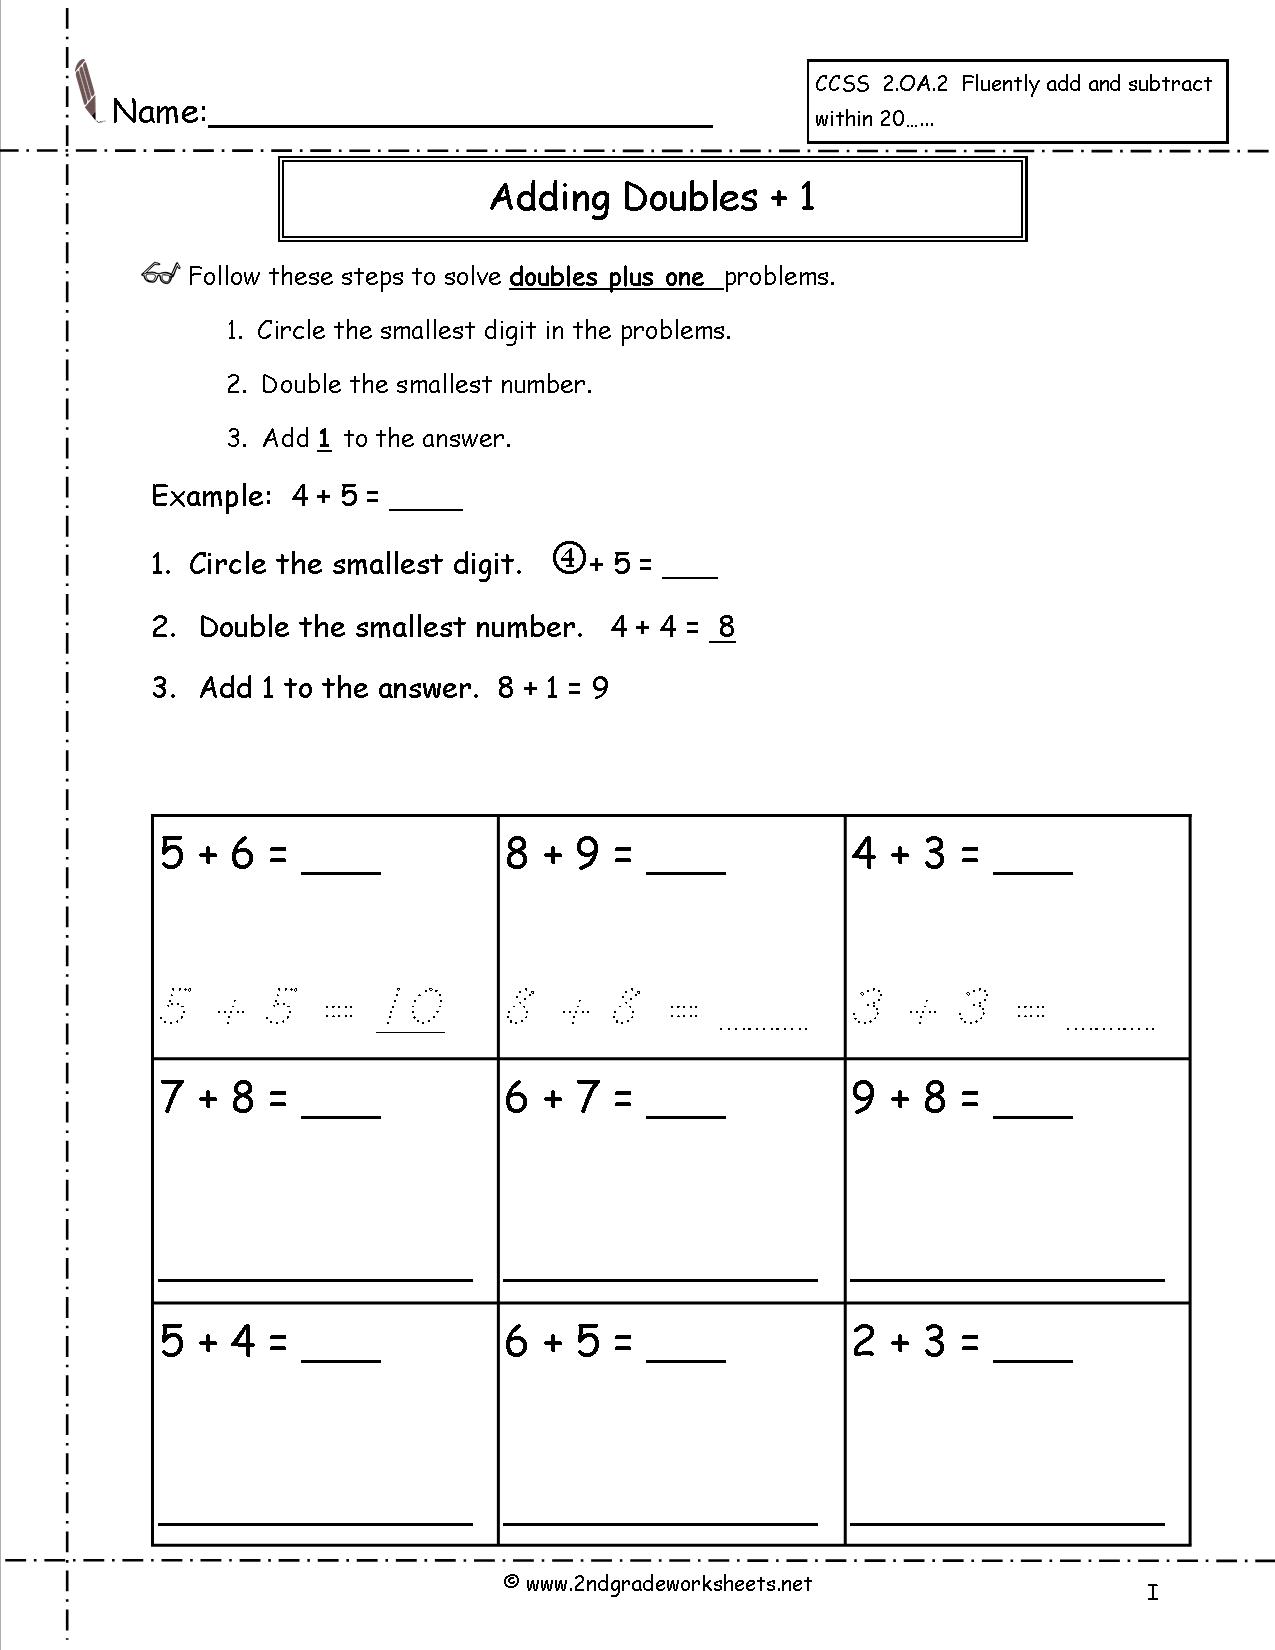 12 Best Images of Doubles Plus One Worksheet Doubles Plus 1 Addition